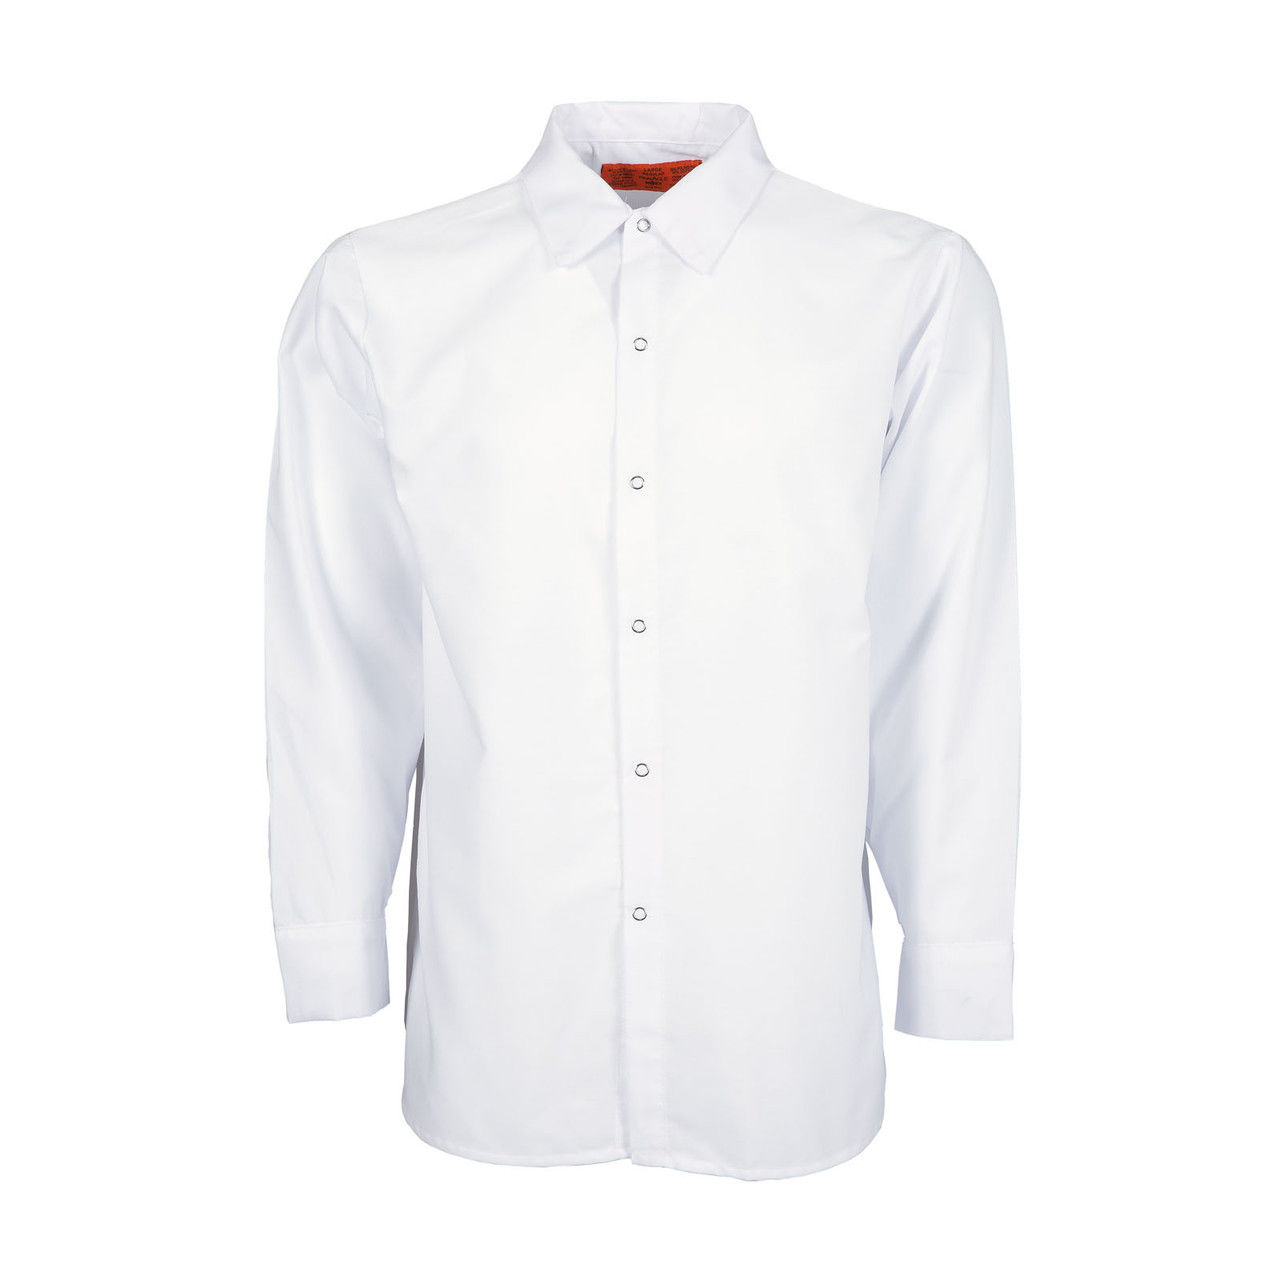 What should I look for in selecting a white work shirt?